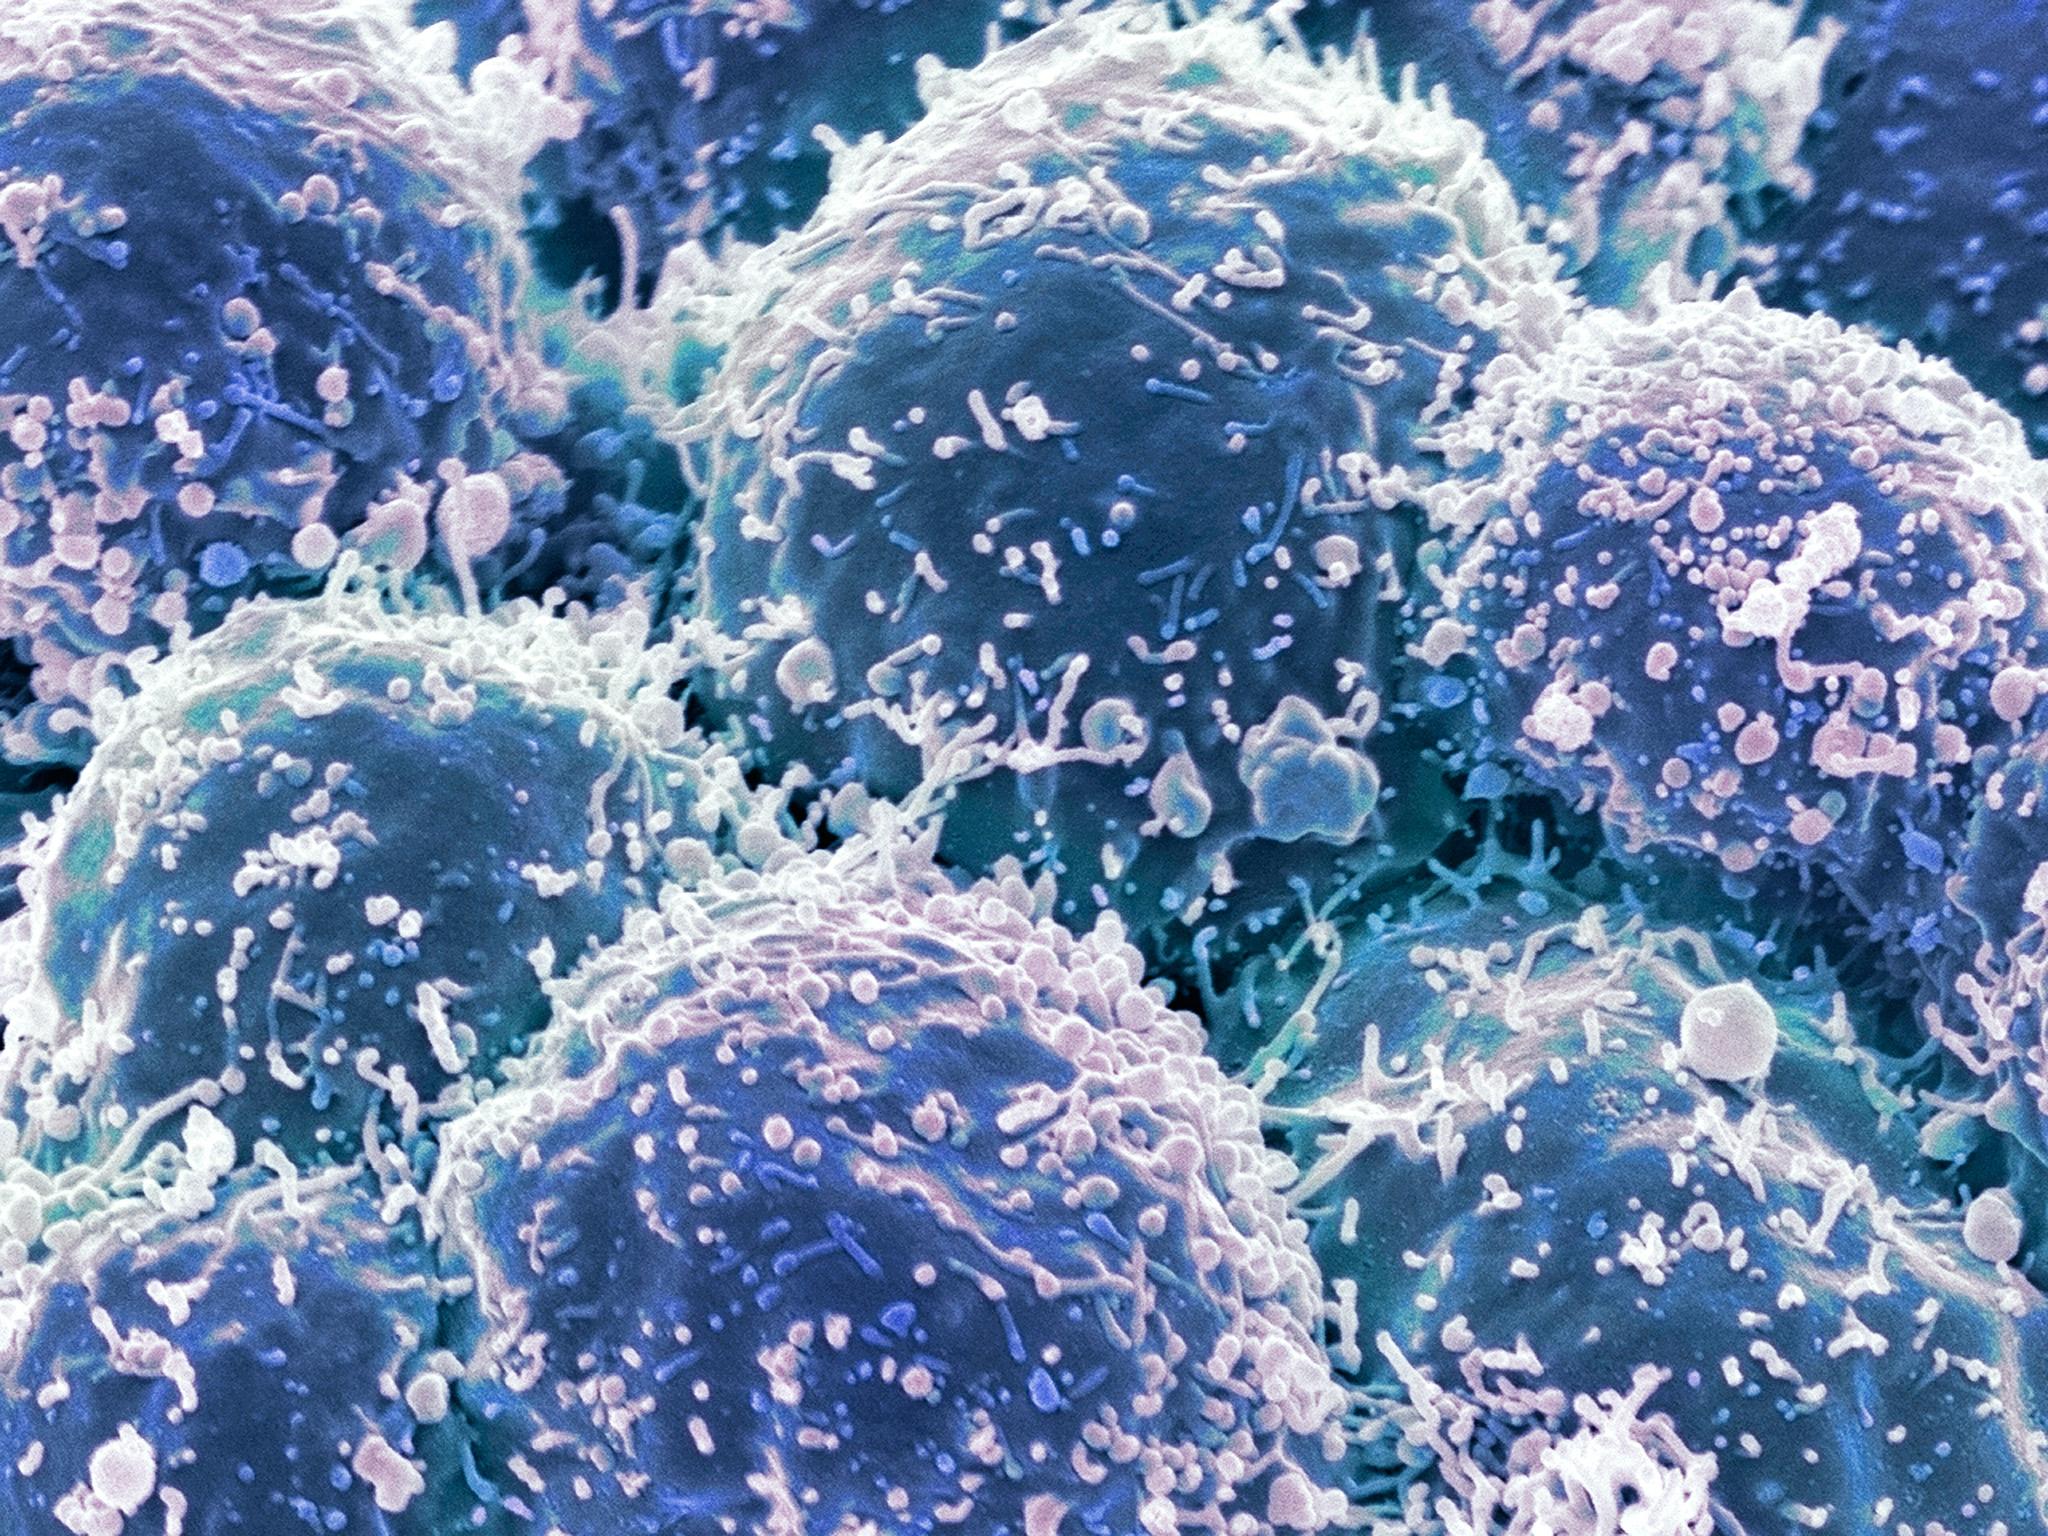 Micrographic view of lung cancer cells